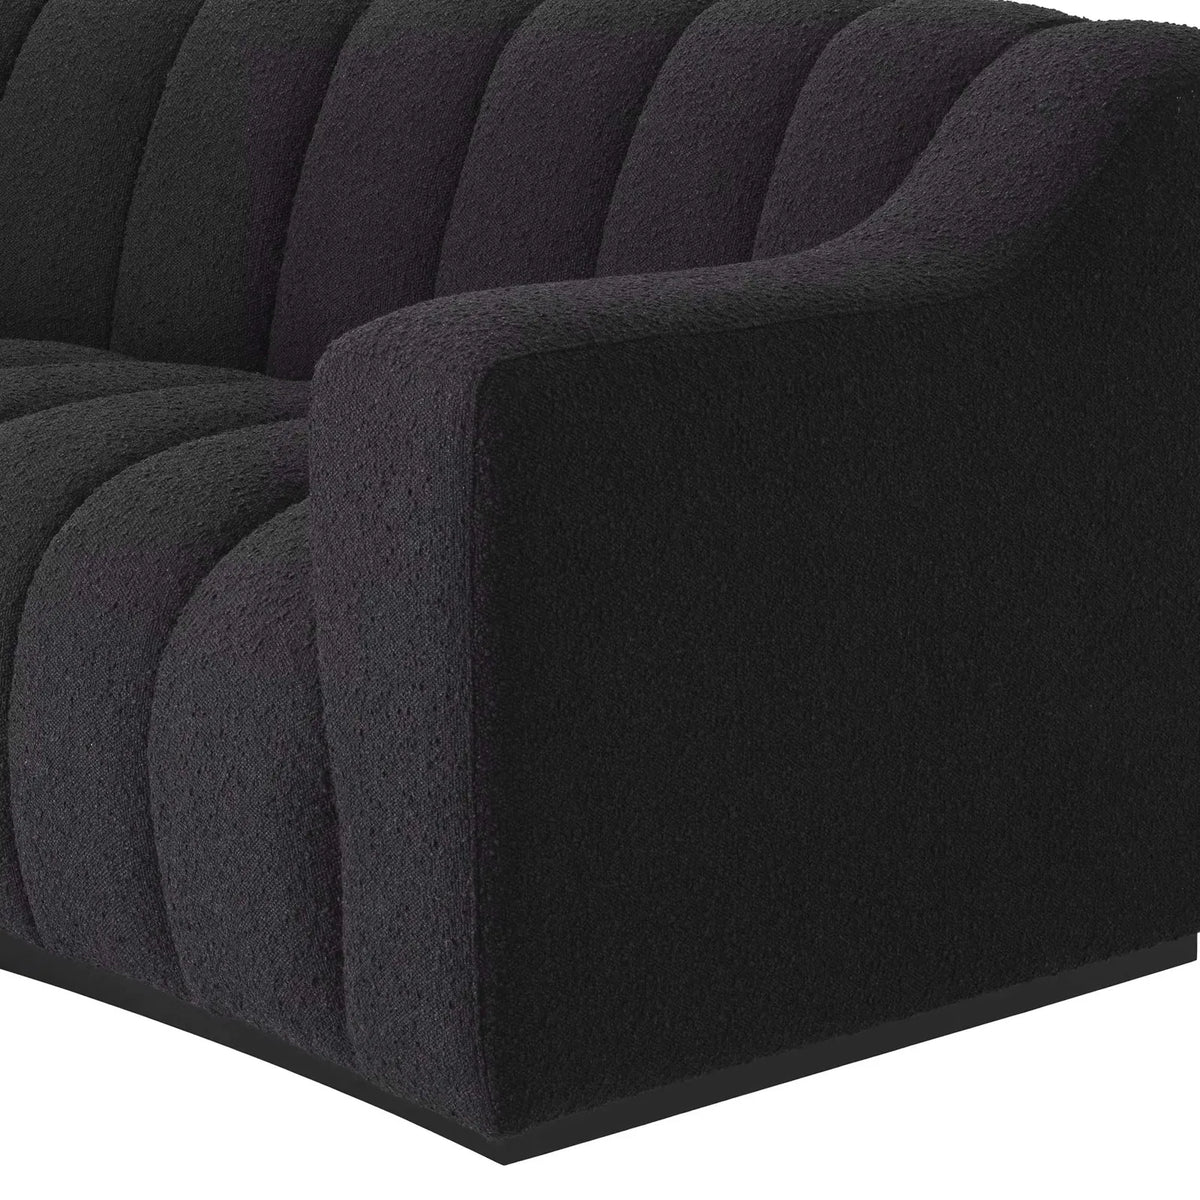 HAND CRAFTED KENT BLACK BOUCLE CURVED SOFA